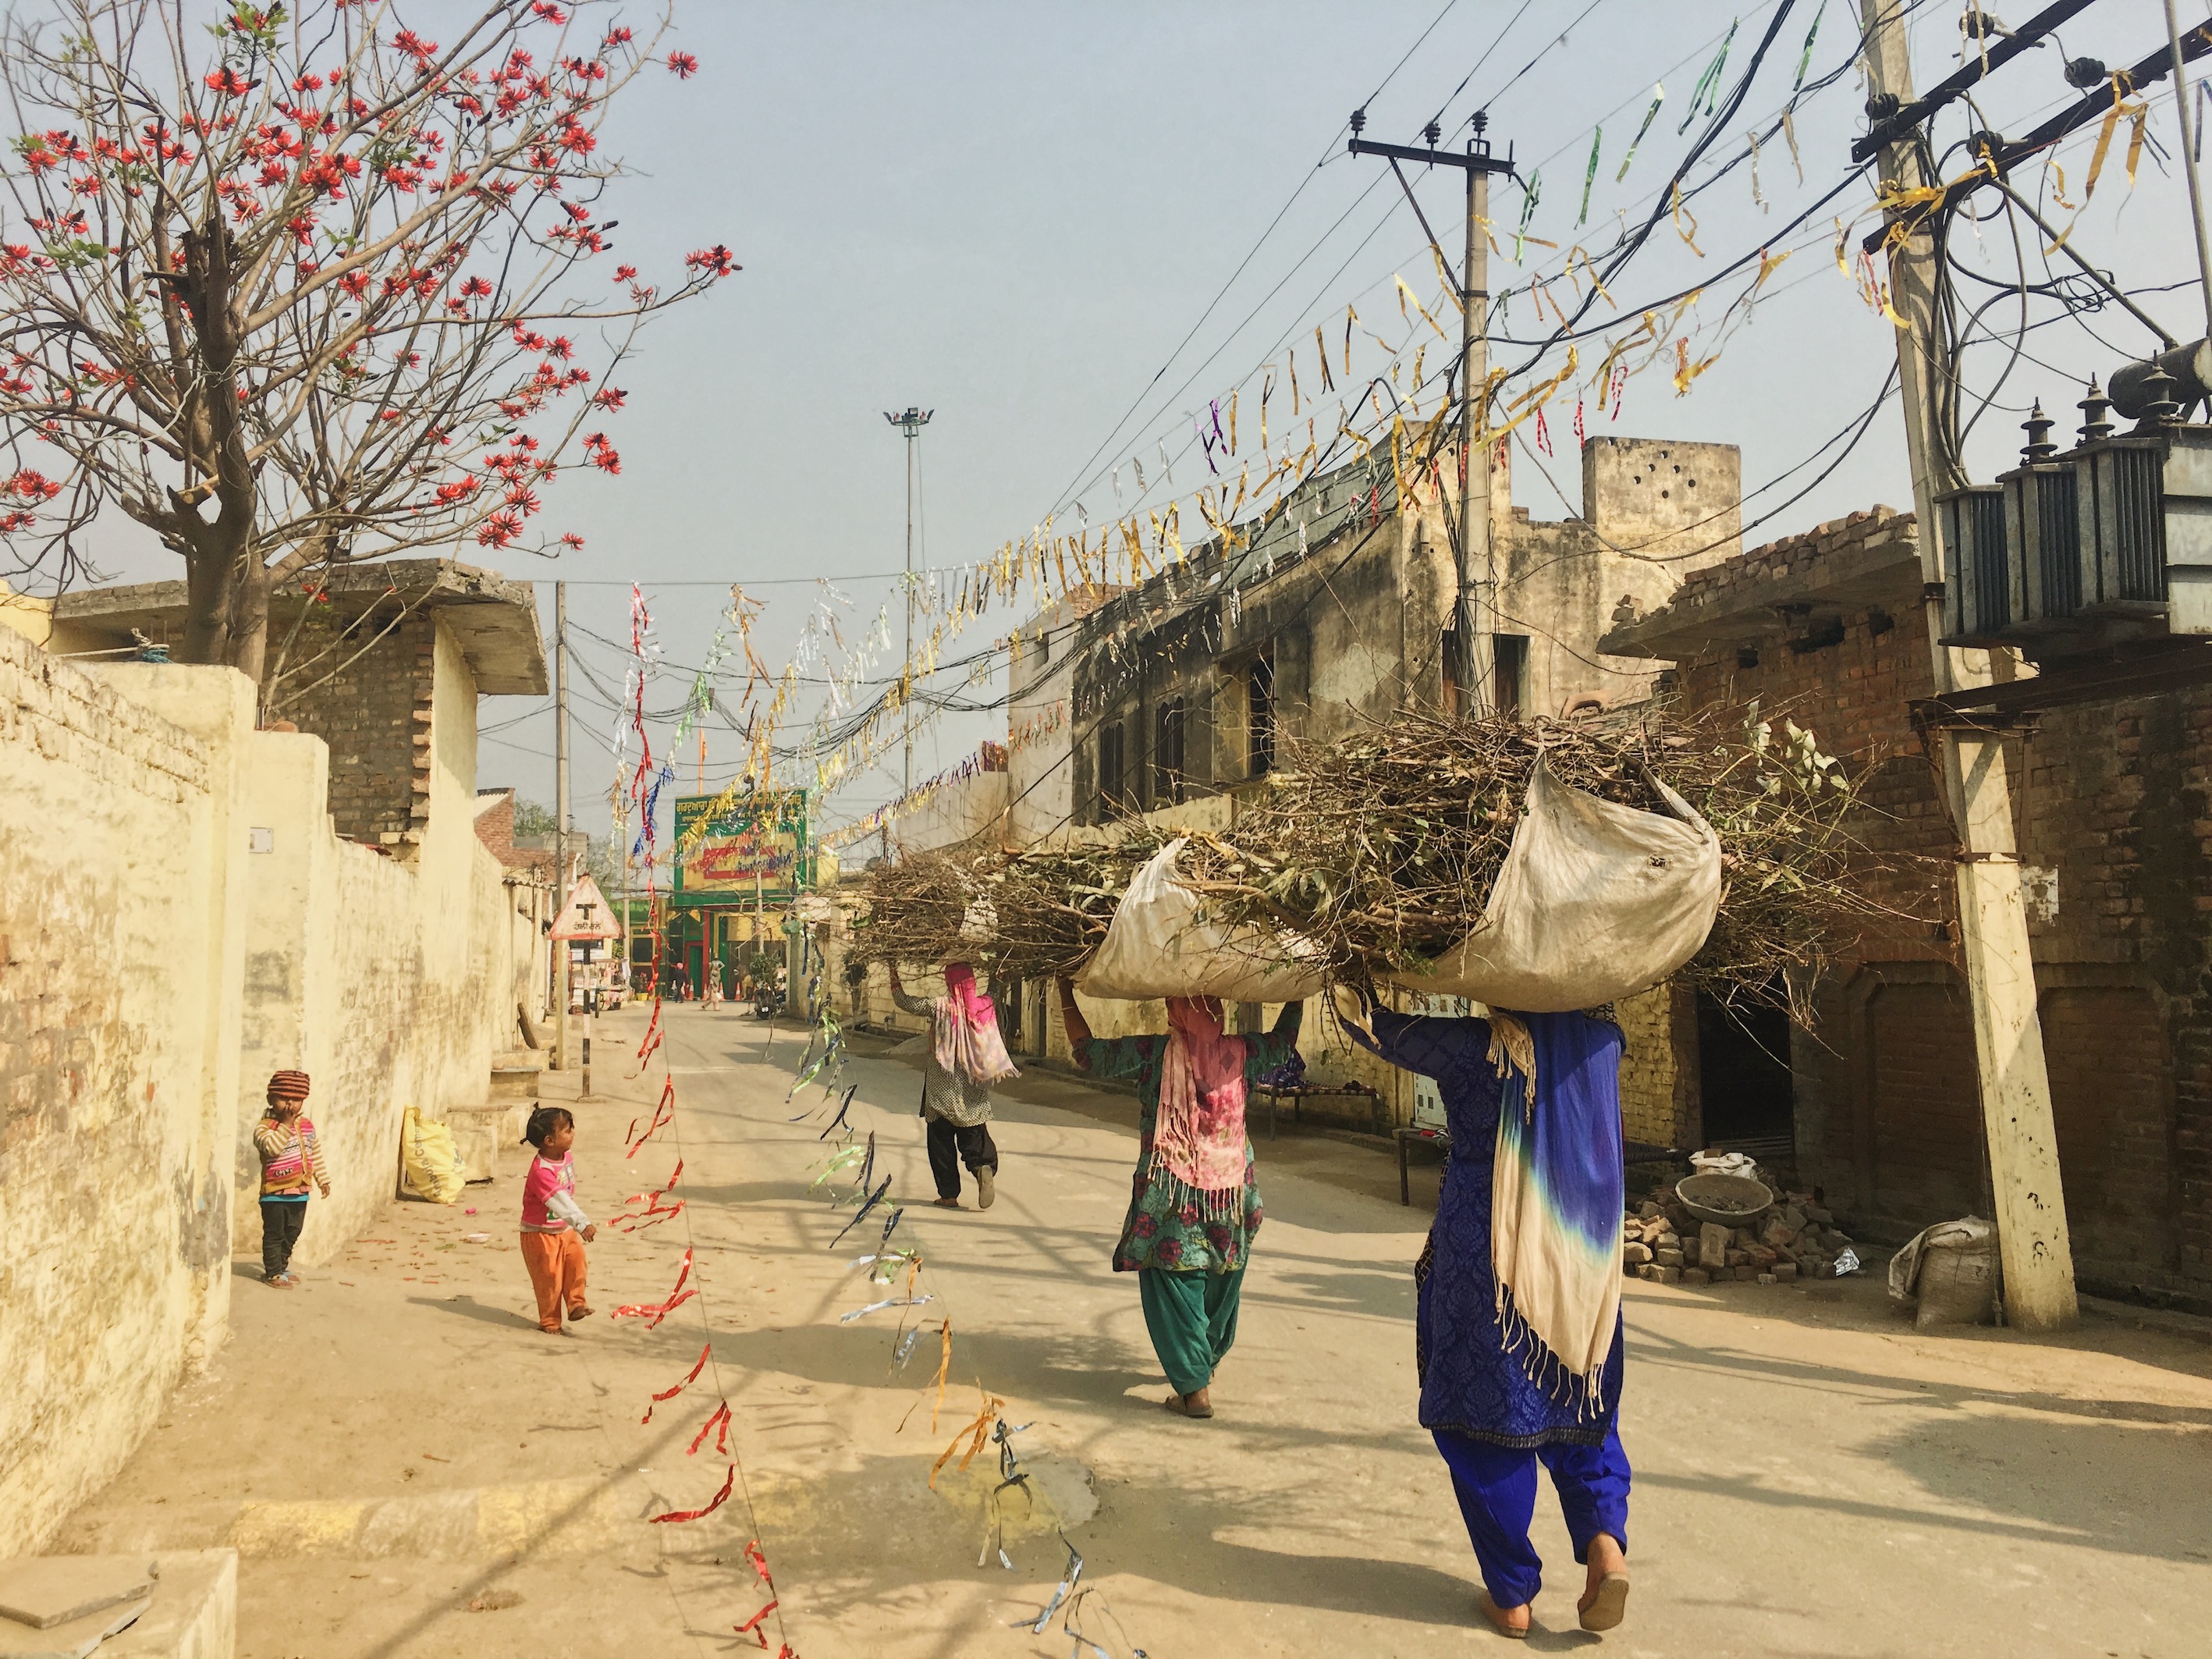 There is an existing gap in education between boys and girls, specifically in villages. Girls tend to leave school early to take on responsibilities at home. In photograph: Young women carrying sweepings.